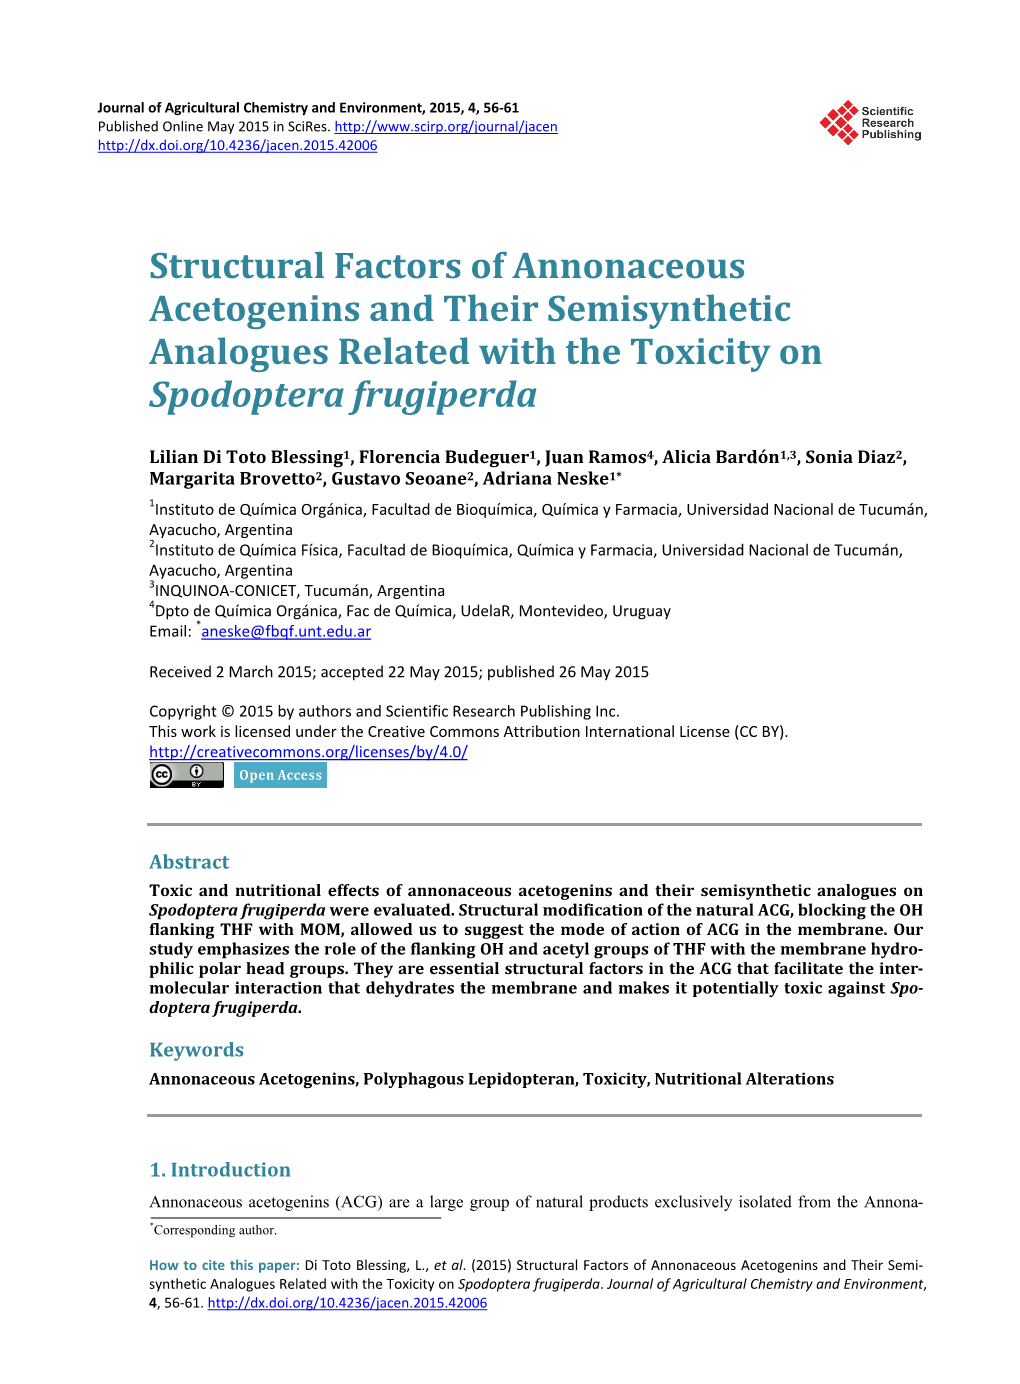 Structural Factors of Annonaceous Acetogenins and Their Semisynthetic Analogues Related with the Toxicity on Spodoptera Frugiperda